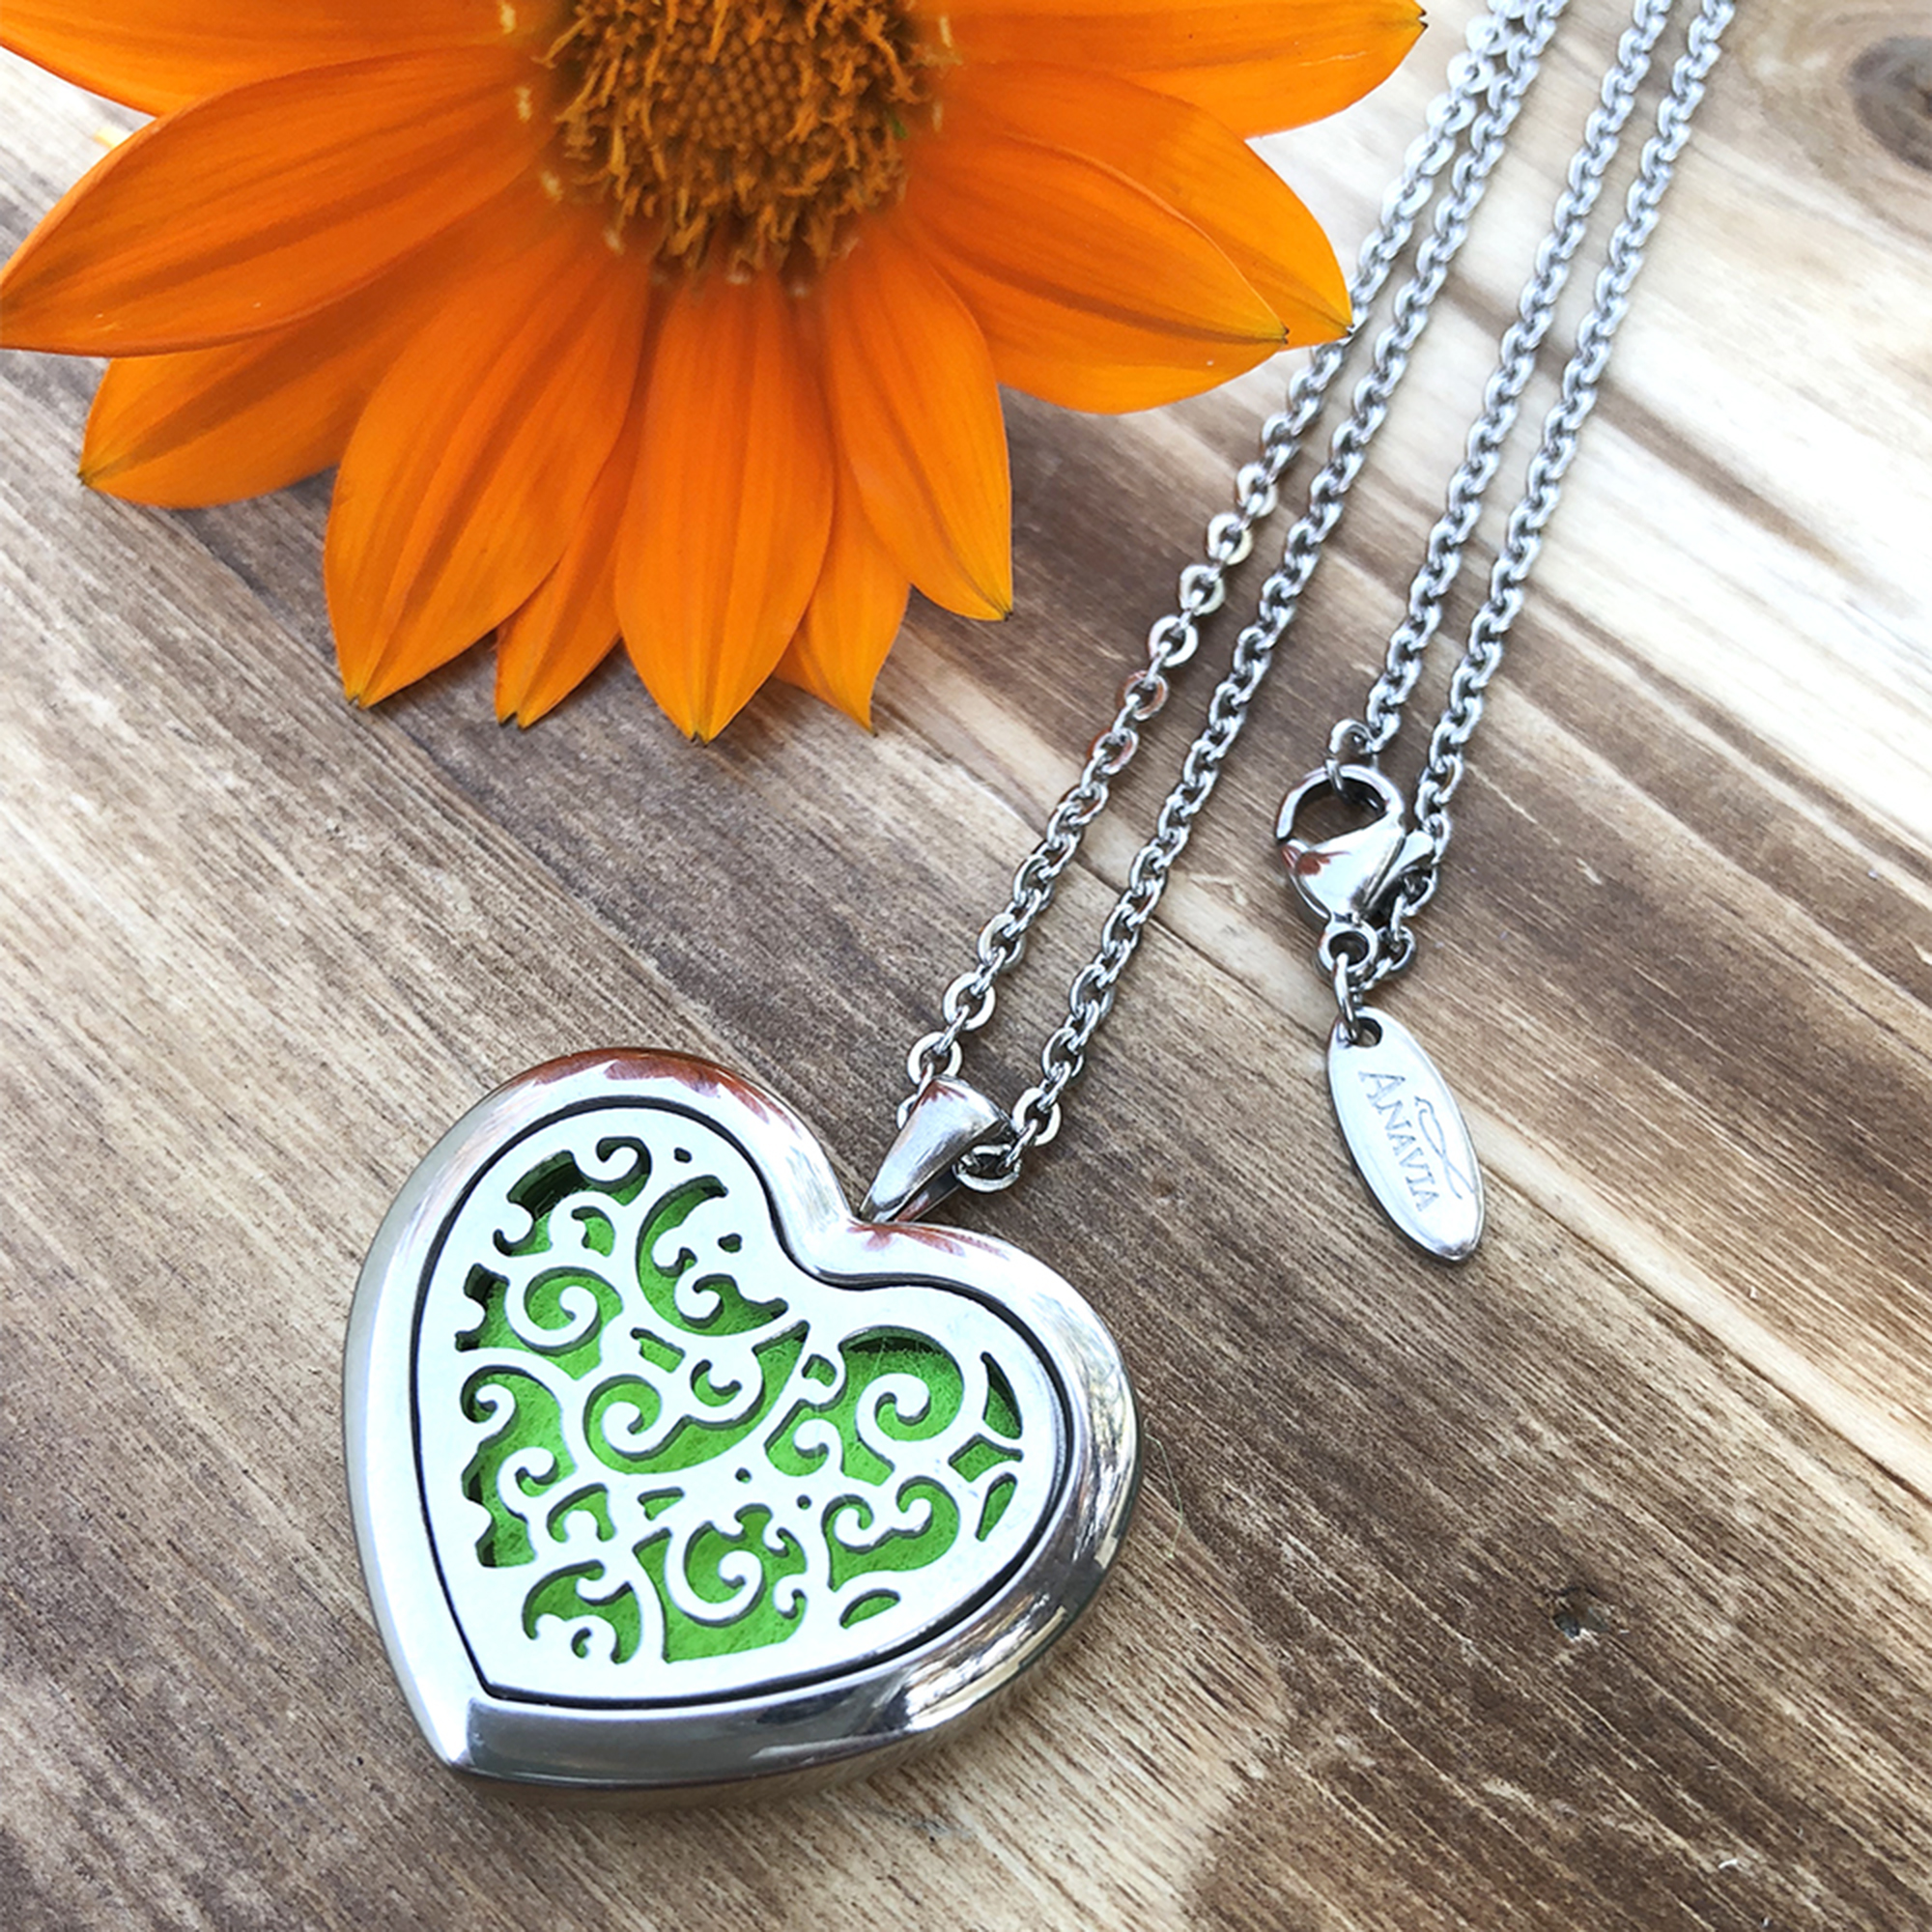 Anavia Mother's Day Gift for Mom, Heart Essential Oil Necklace, Diffuser Jewelry, Gift for Wife, Wife Birthday Gift, Gift for Girlfriend, Anniversary Gift, Friend Gift, Gifts for Mom- Lavender Oil - image 4 of 6